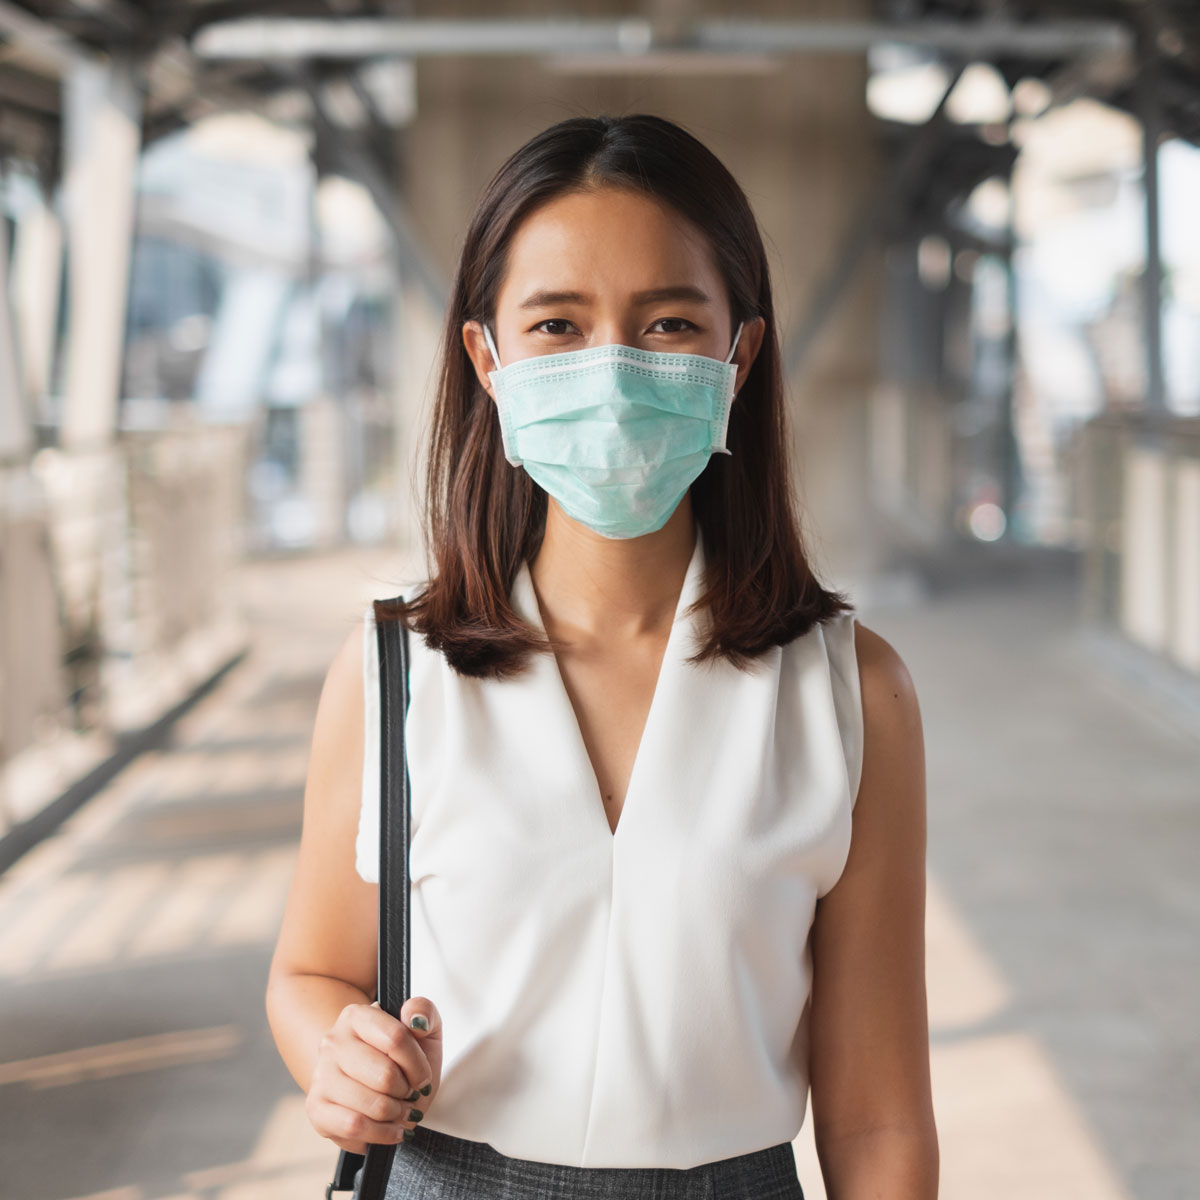 Business woman in a medical mask